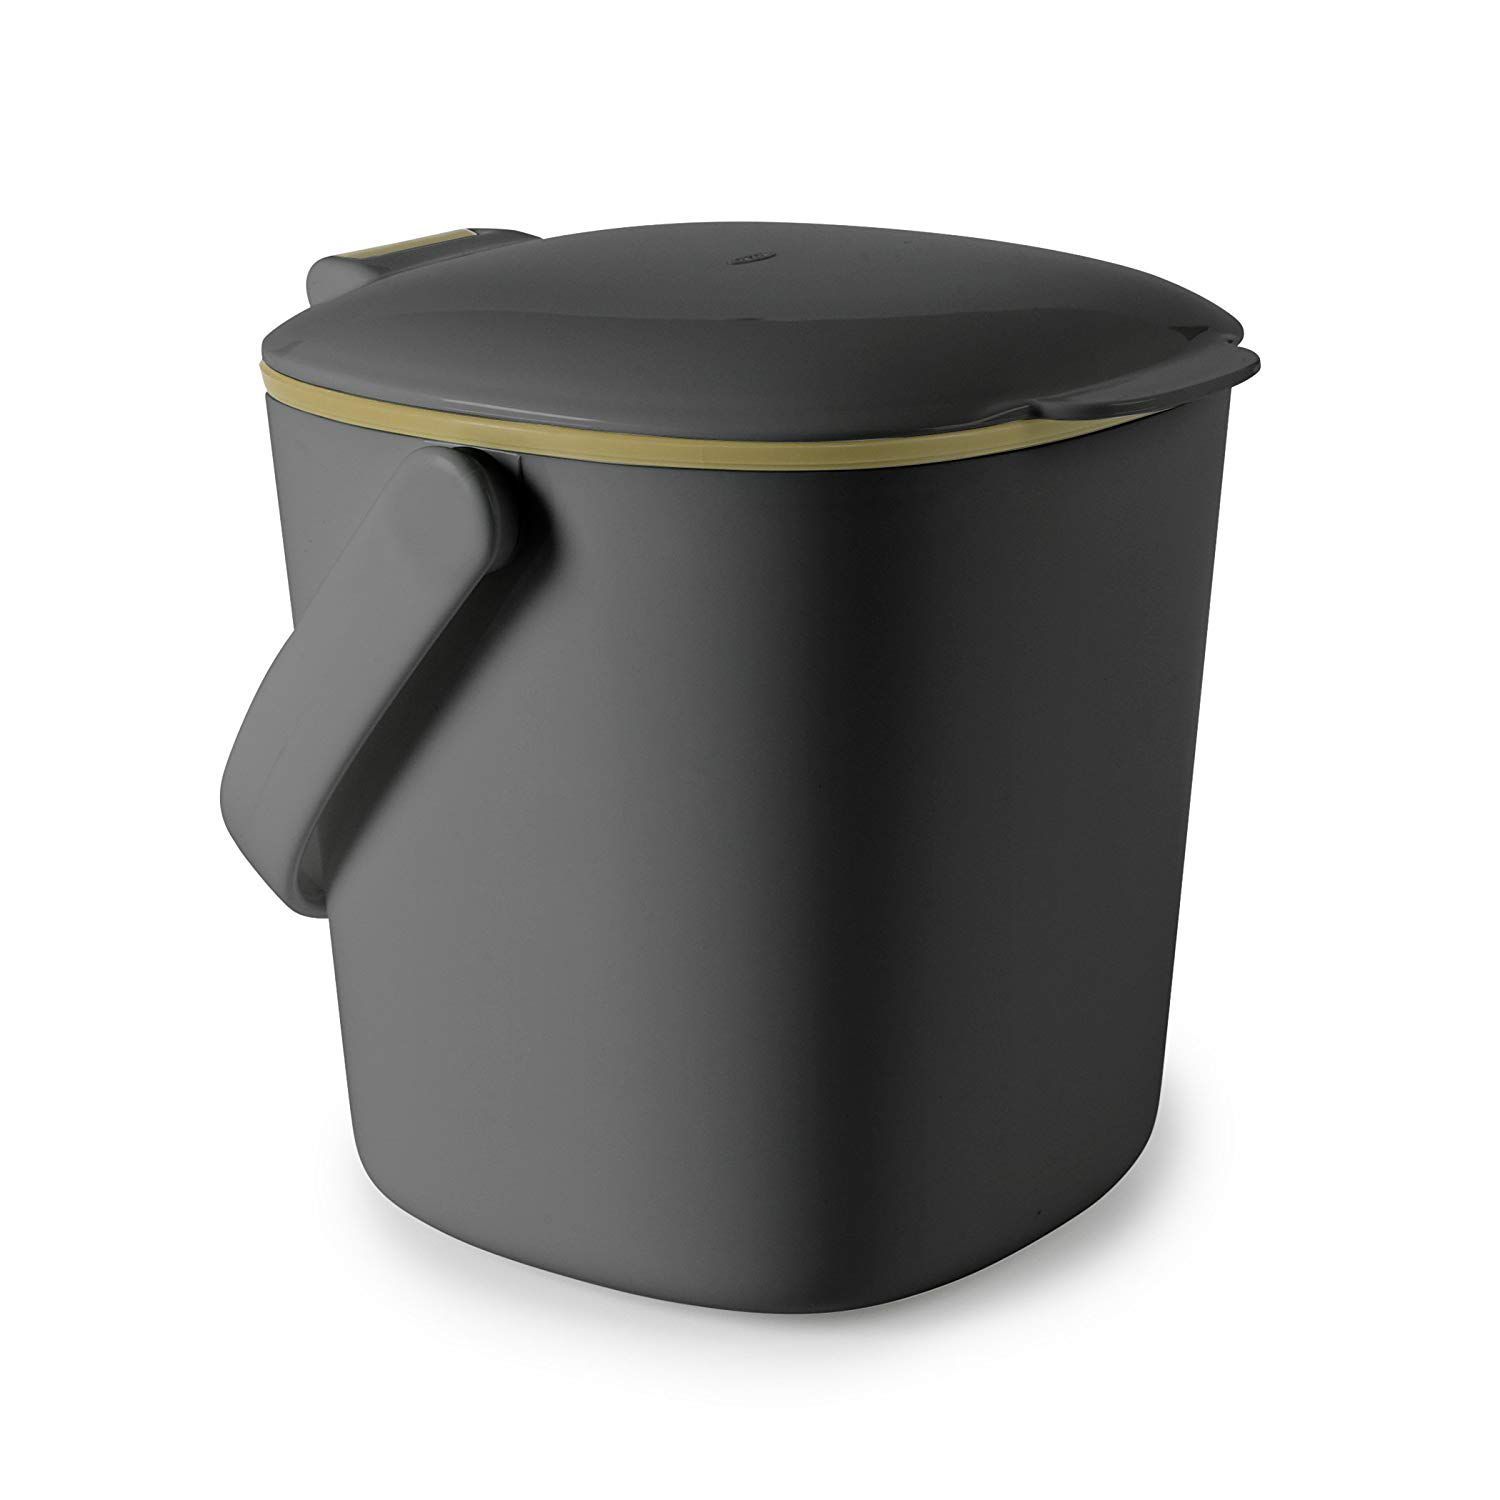 OXO Good Grips Easy Clean Compost Bin, Charcoal